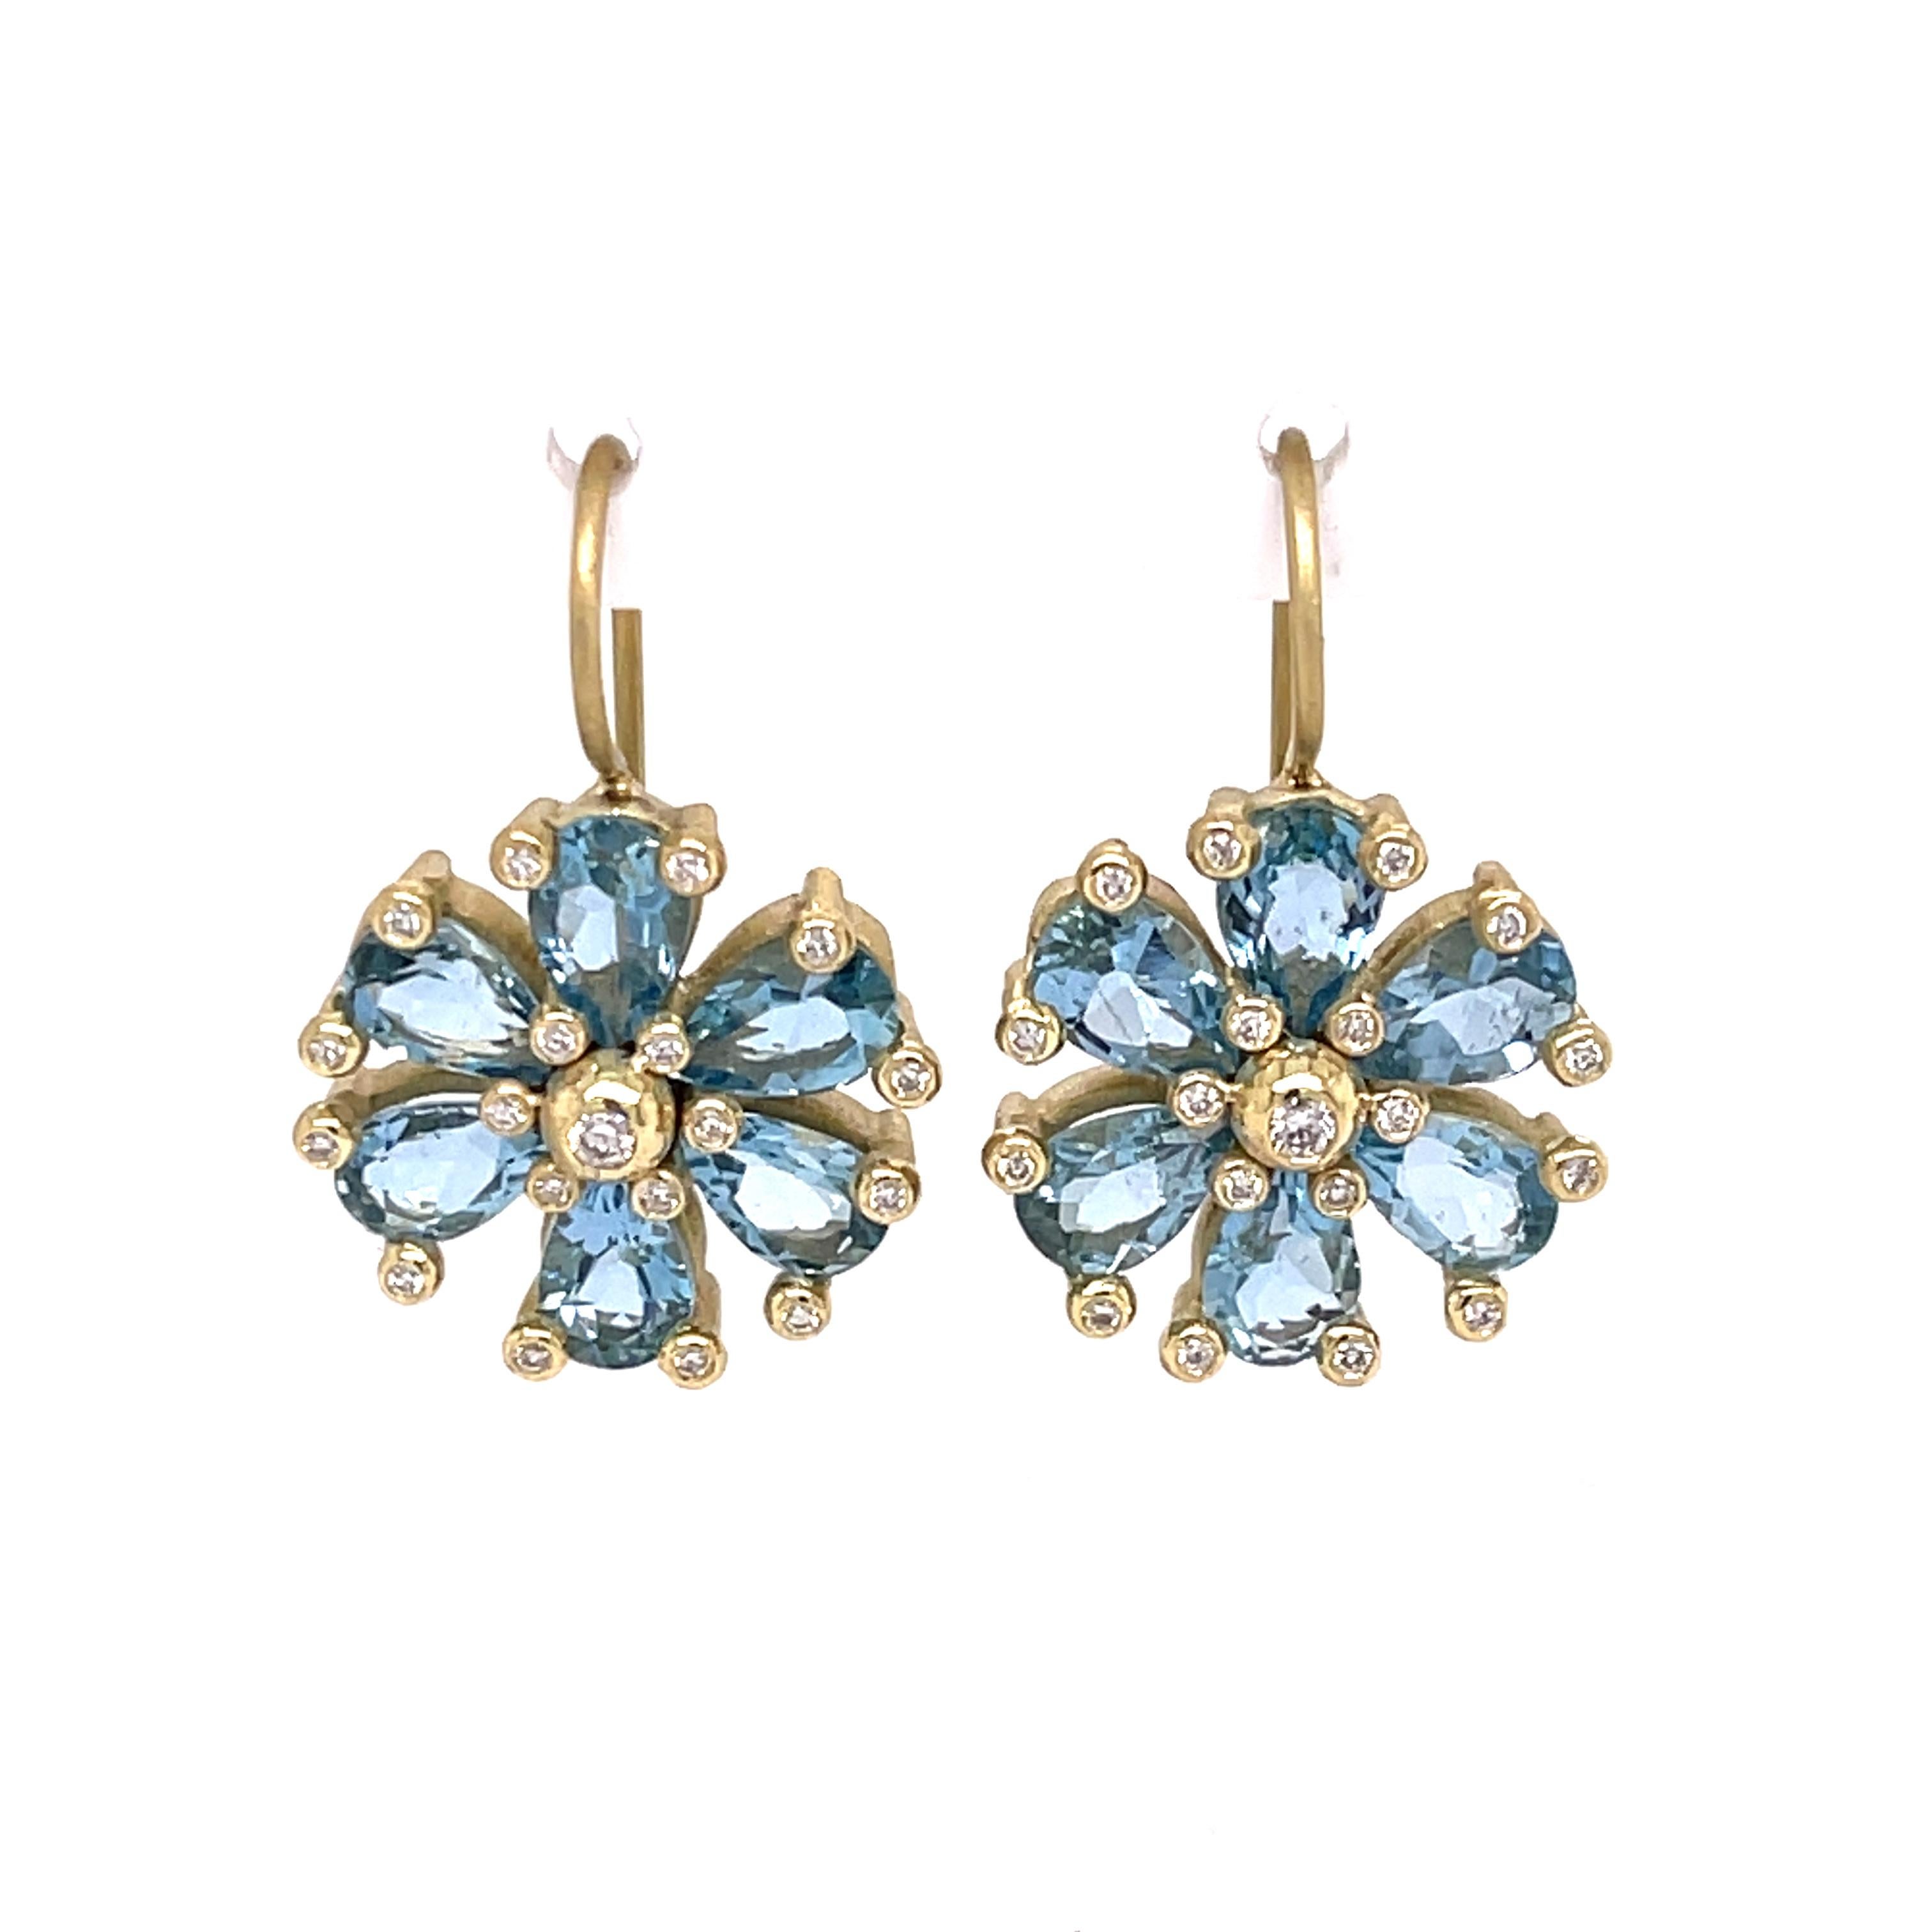 Suzy Landa pear shape aquamarine (4.02ctw) and diamond (0.22ctw) flower drop earrings in 18K yellow gold. The earrings have a diameter of 0.50 inches. Handmade in NYC.